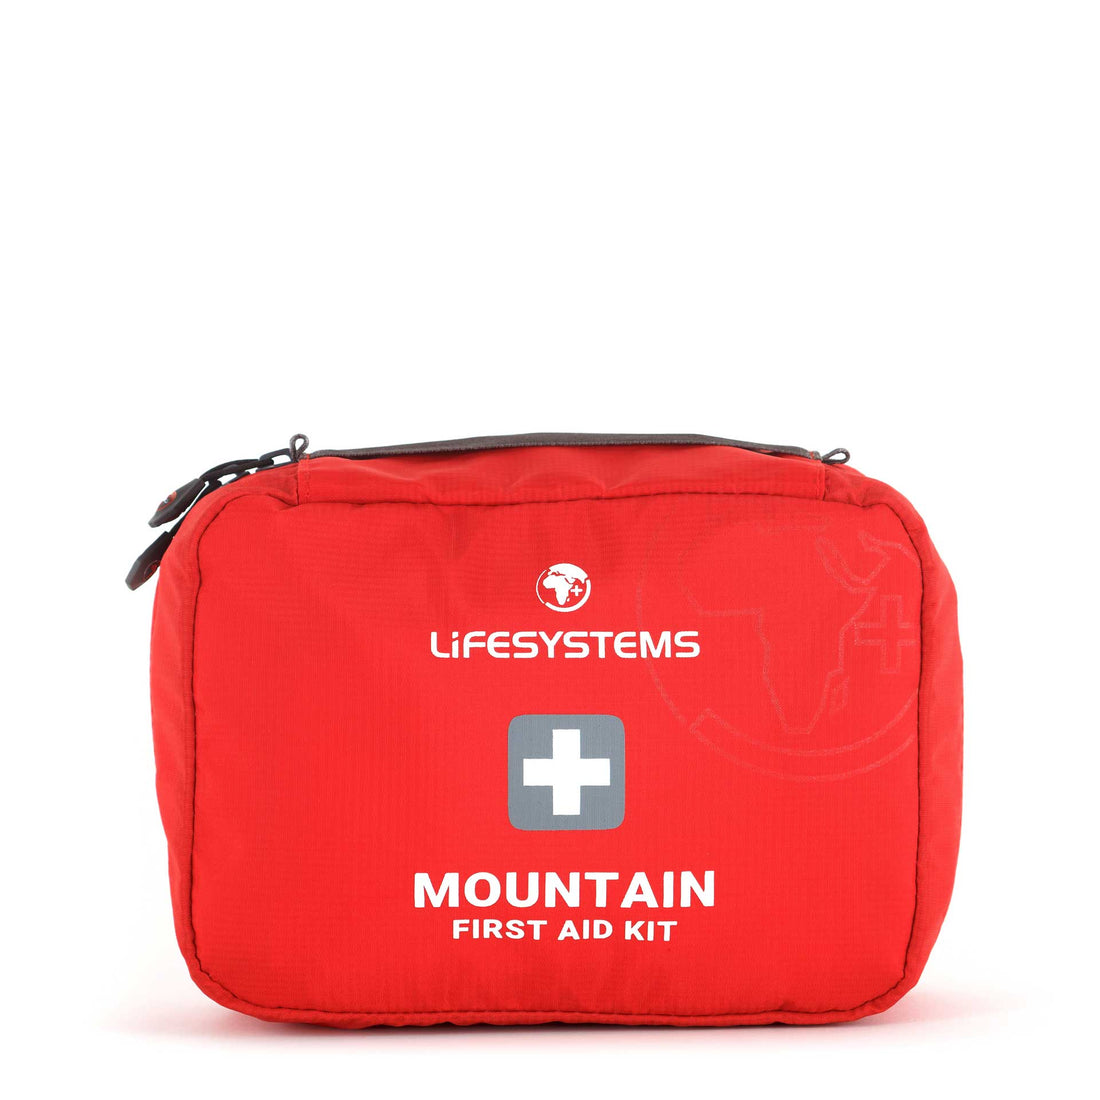 Mountain First Aid Kit - variant[Red]